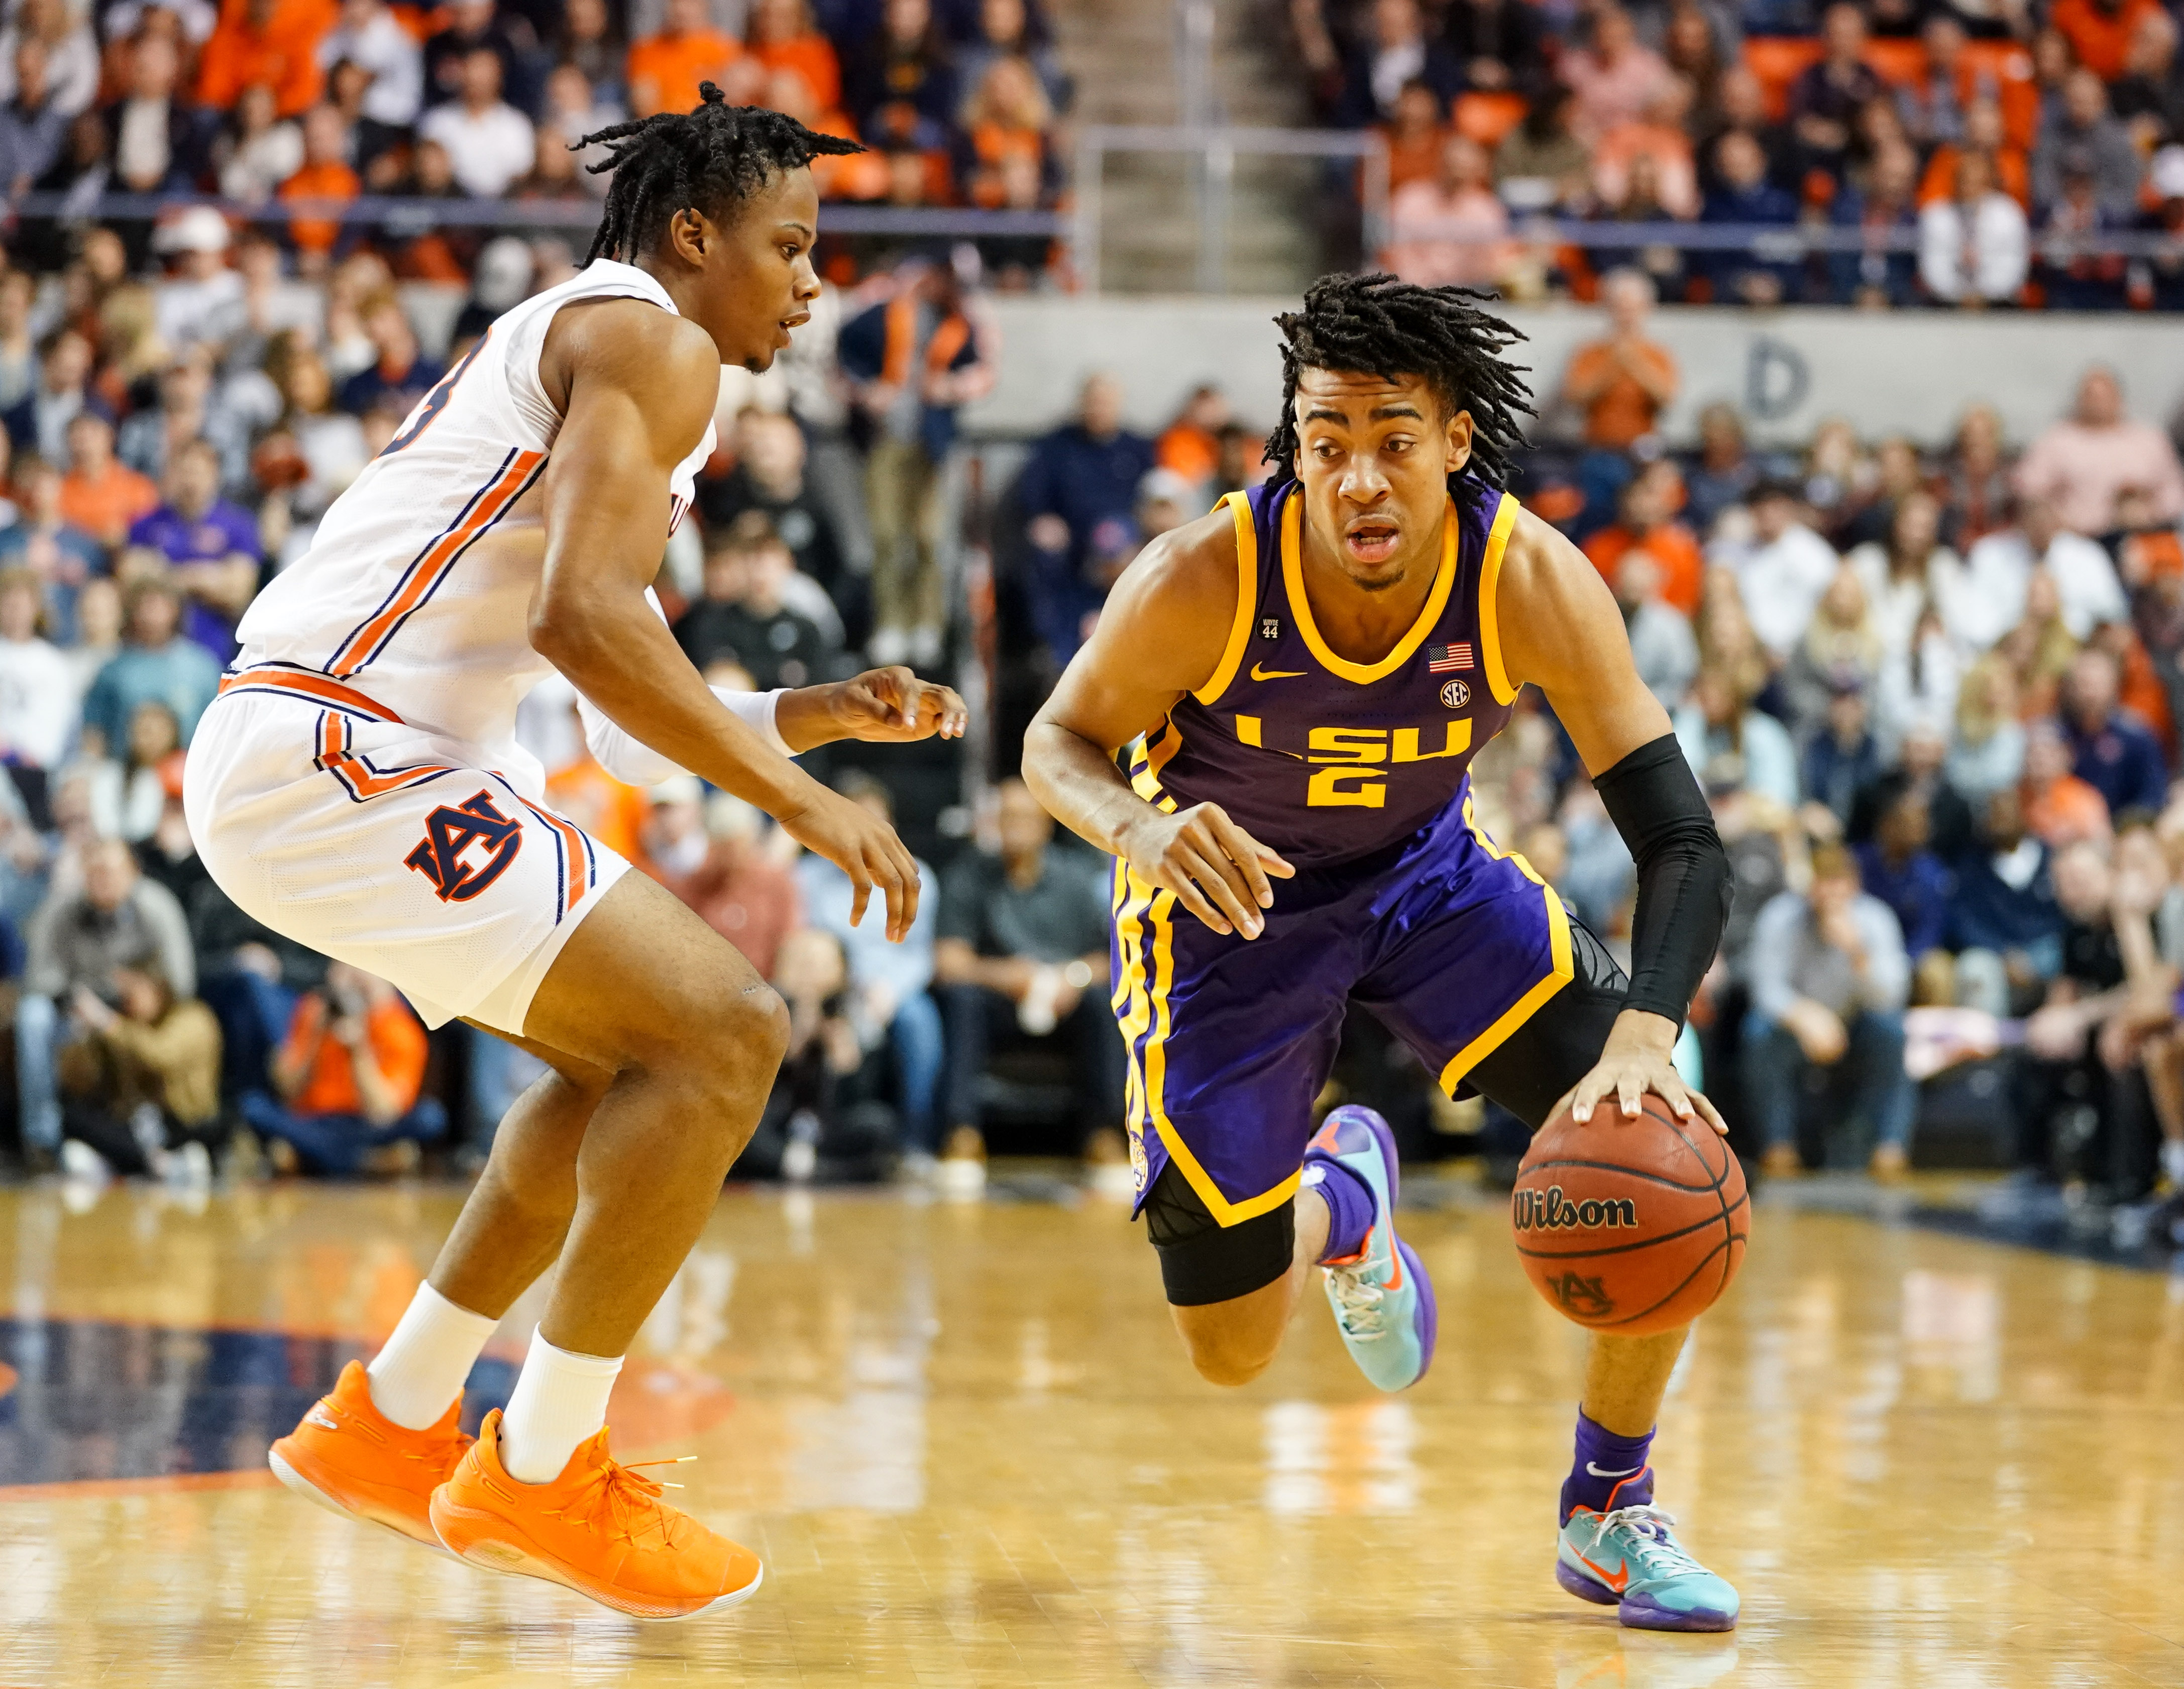 LSU Basketball Ranked No. 14 In the Athletic's "Early Top-25" Preseason List